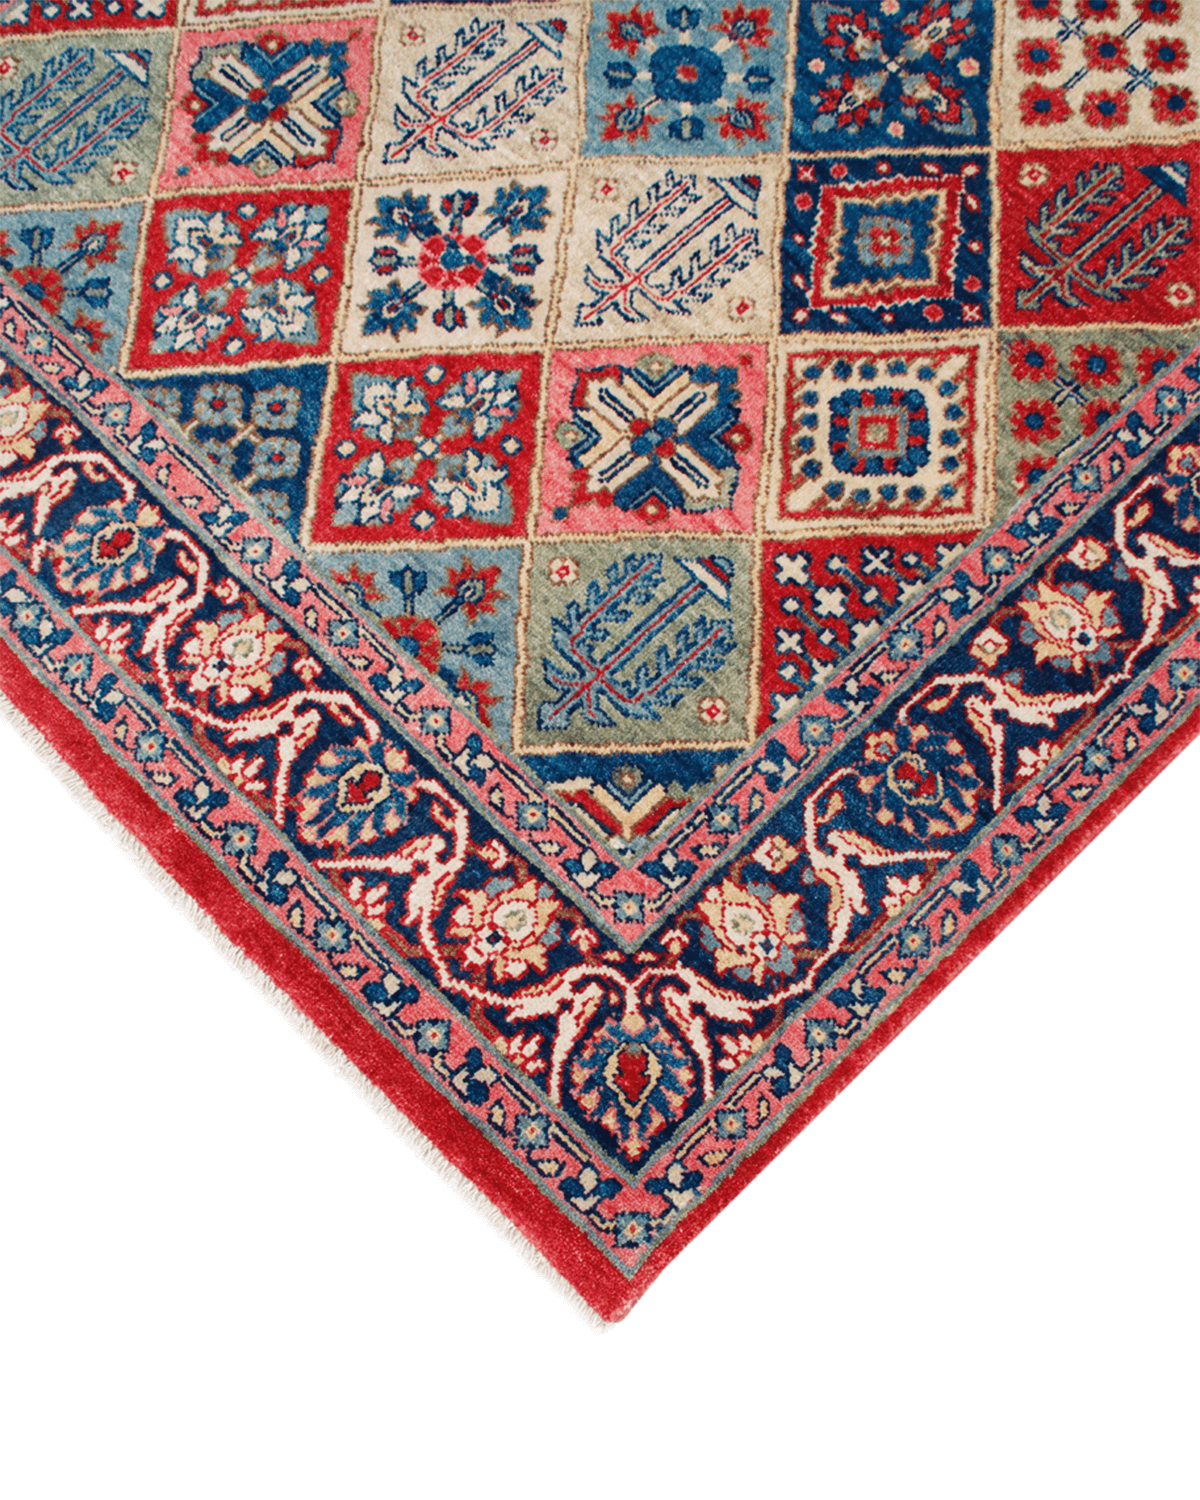 Hand-knotted Traditional Rug (FZ-43)